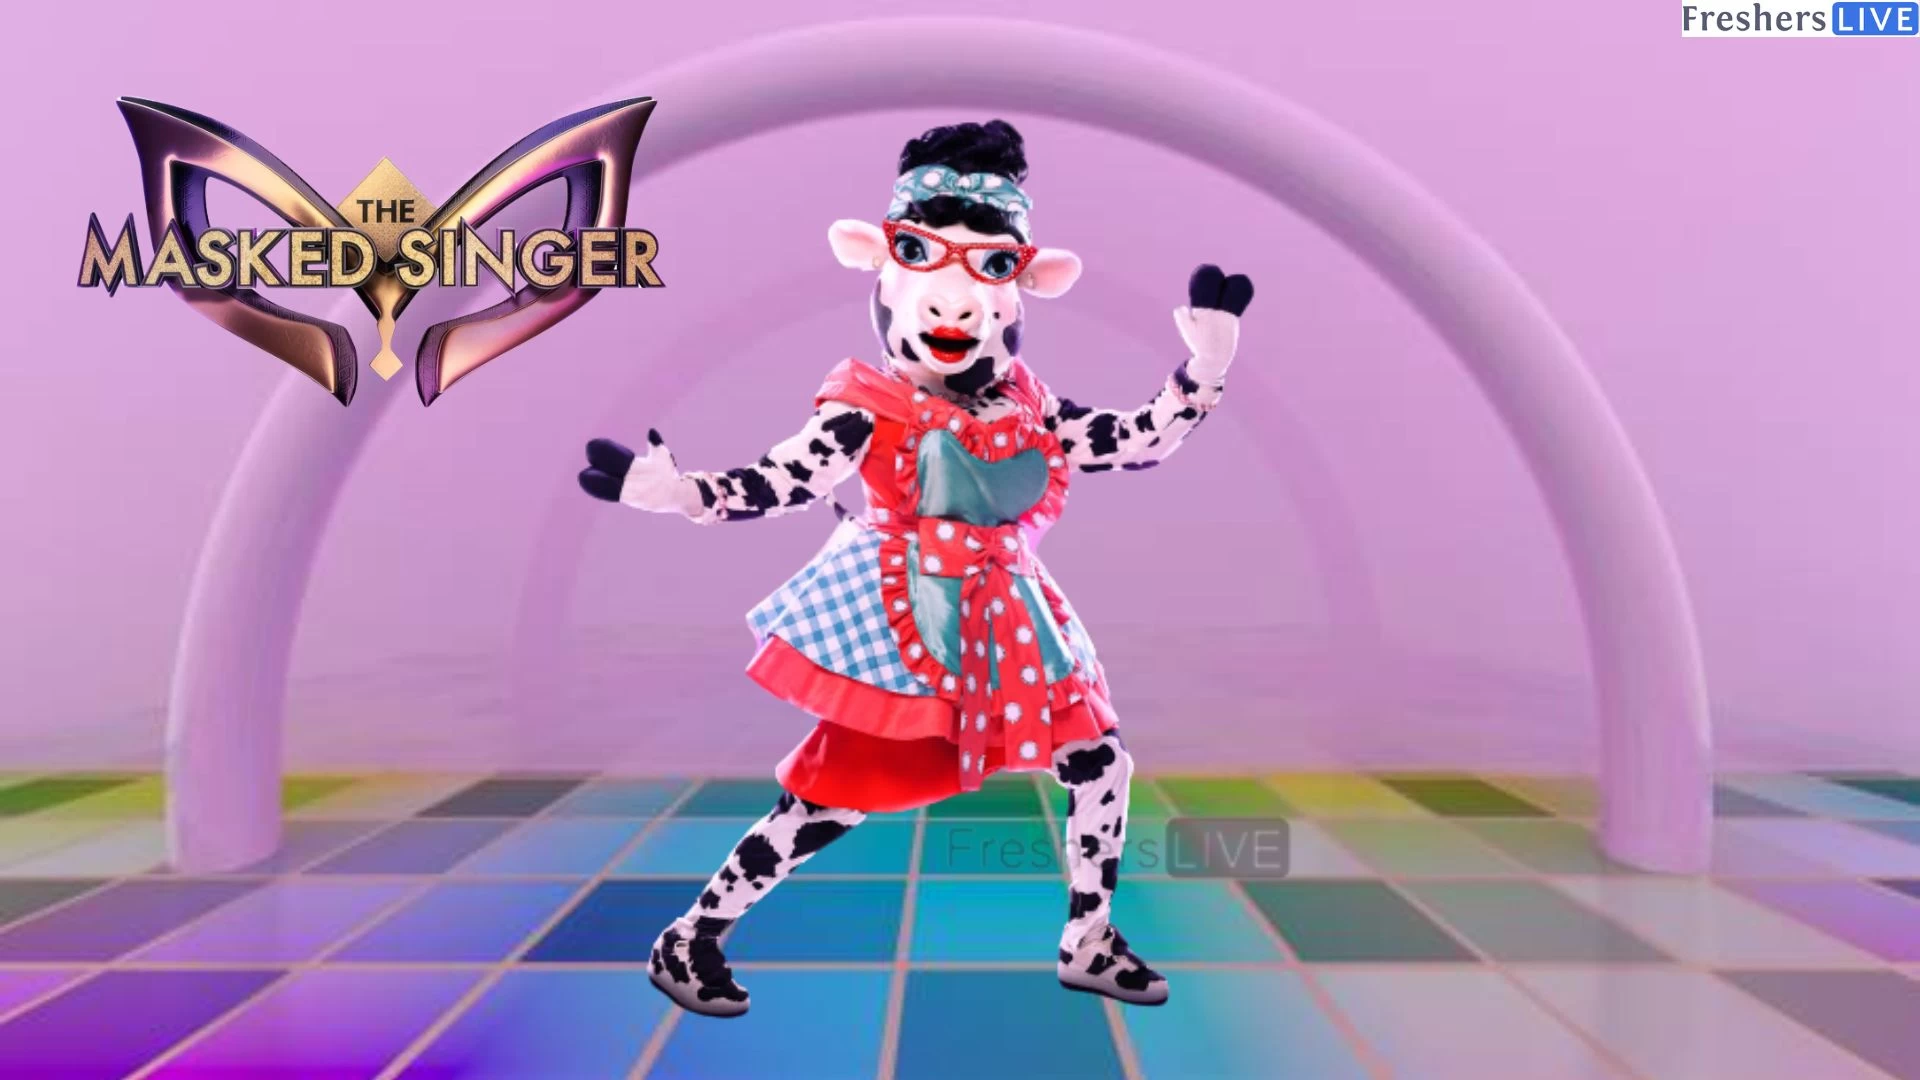 Cow on Masked Singer Season 10 Revealed: Who is the Cow on Masked Singer Season 10?